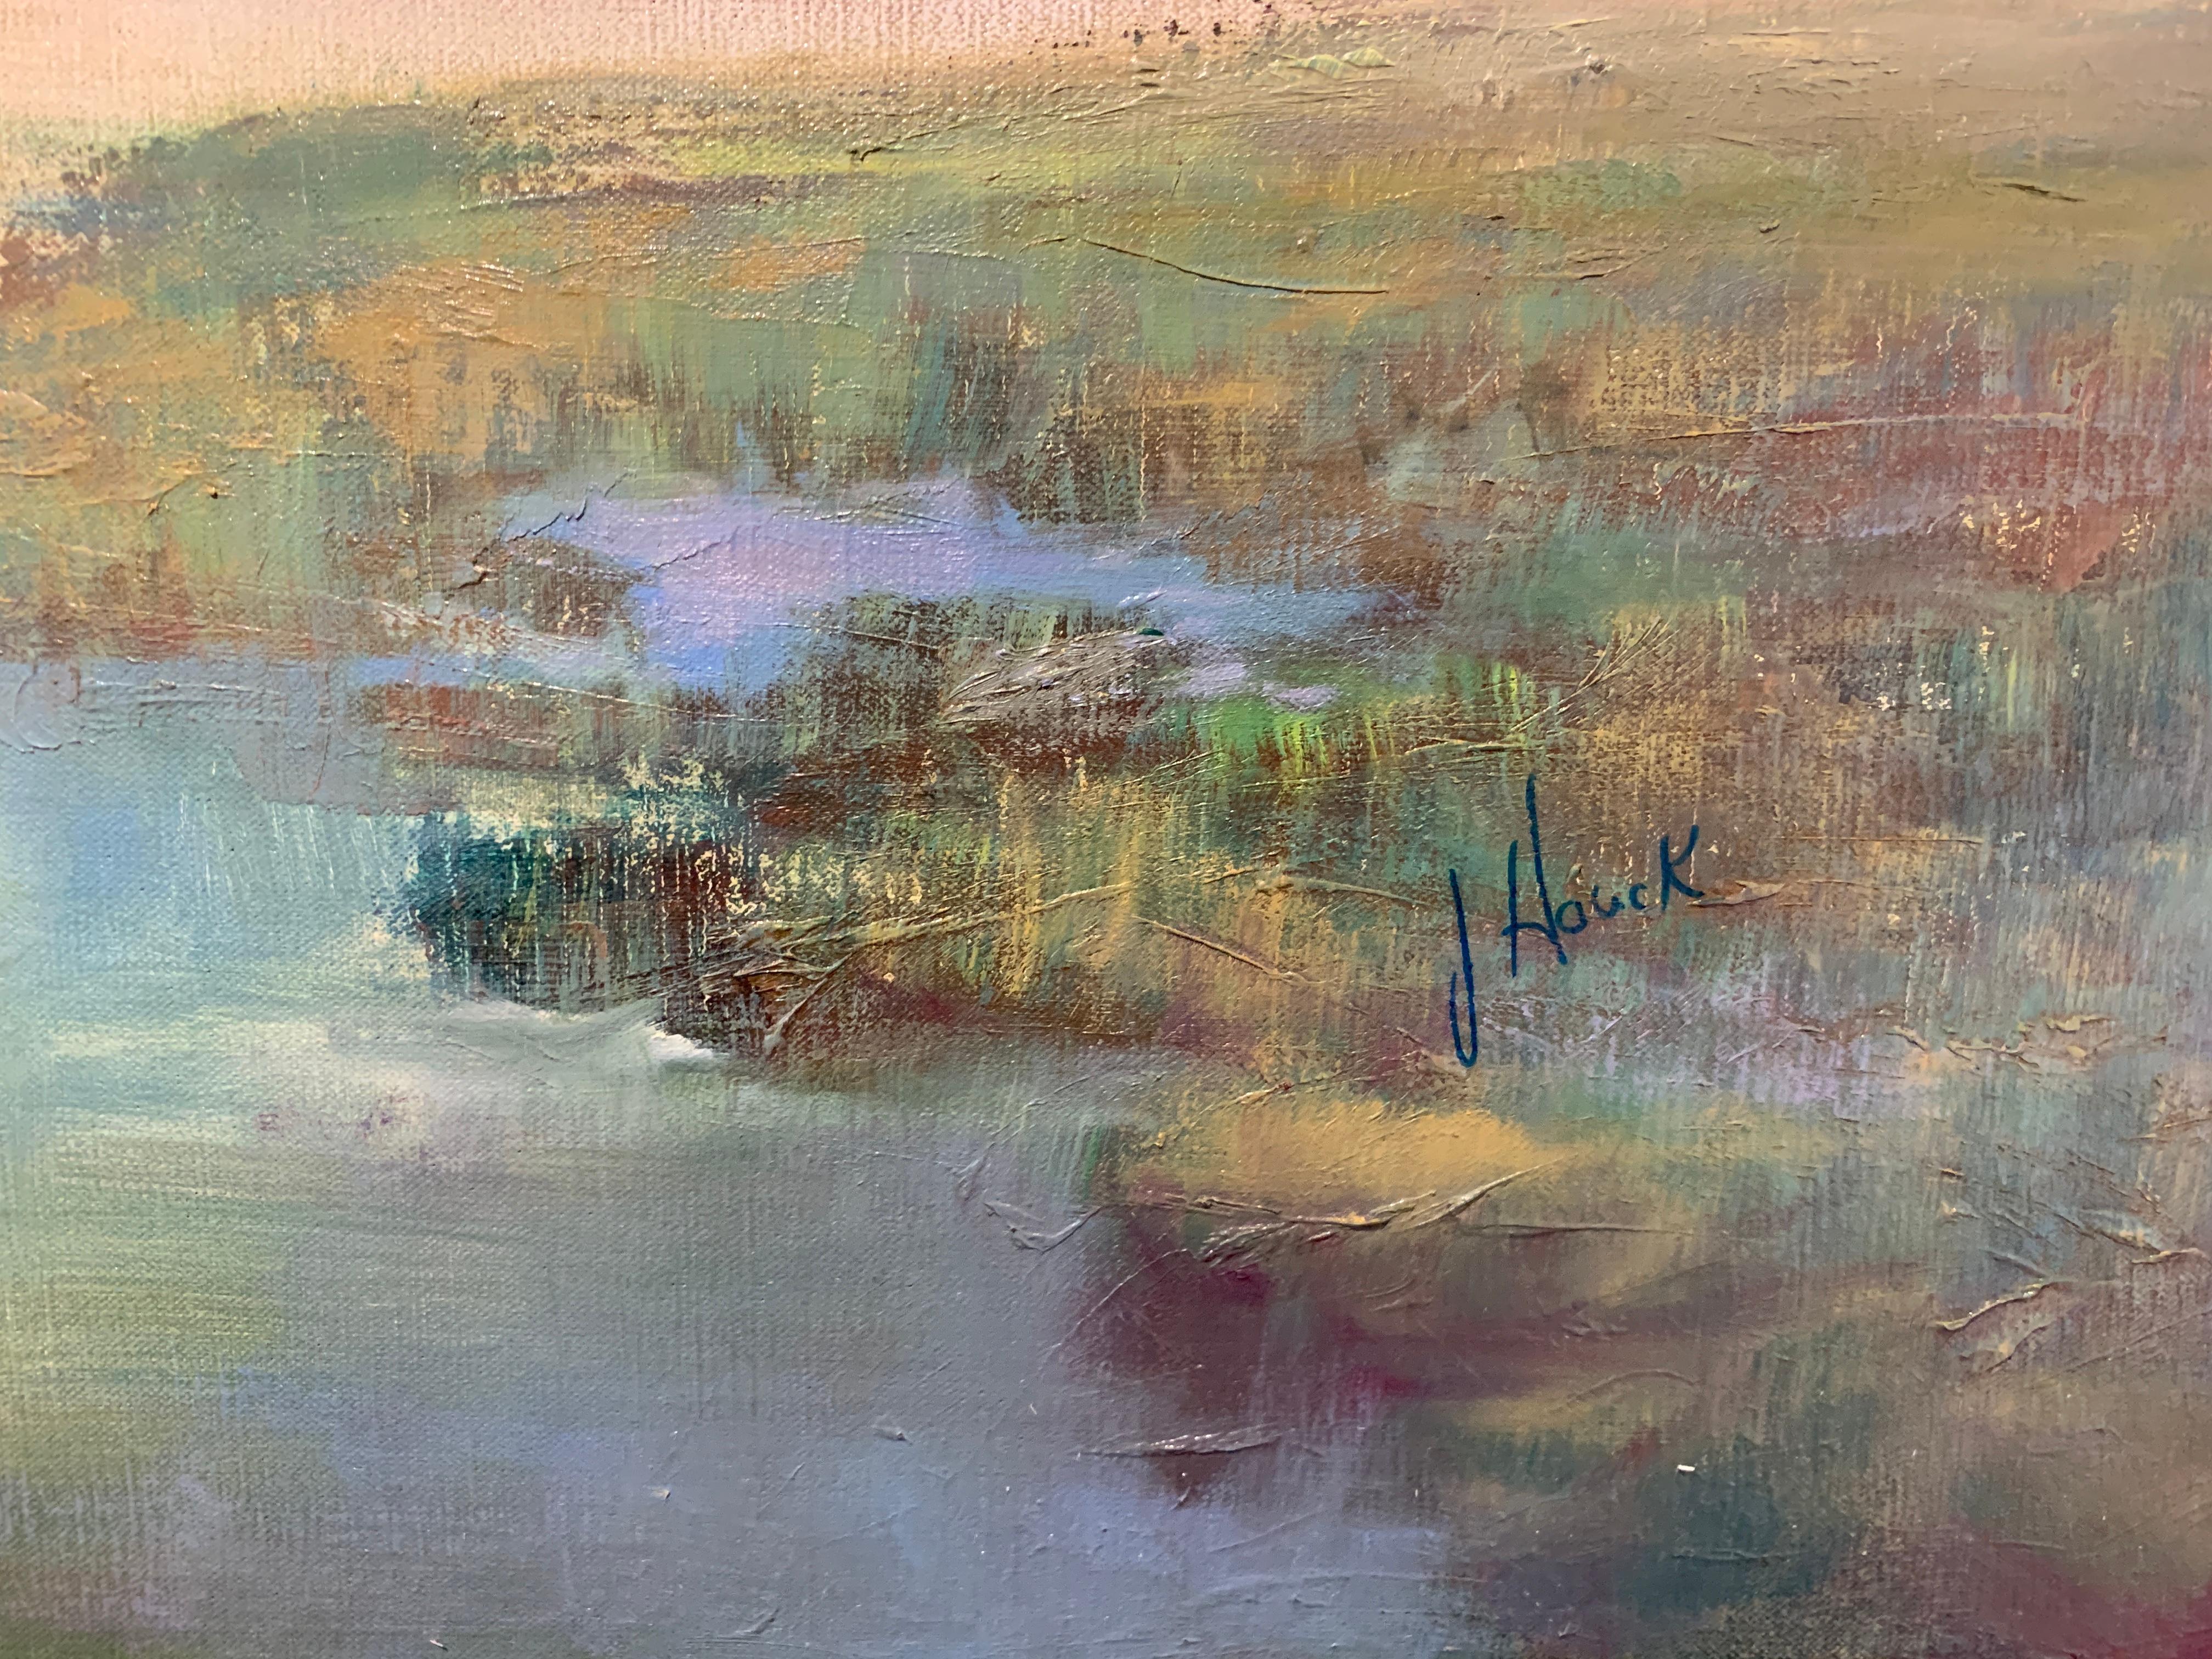 The Clearing Clouds by Julie Houck, Oil on Linen Post-Impressionist Painting 1